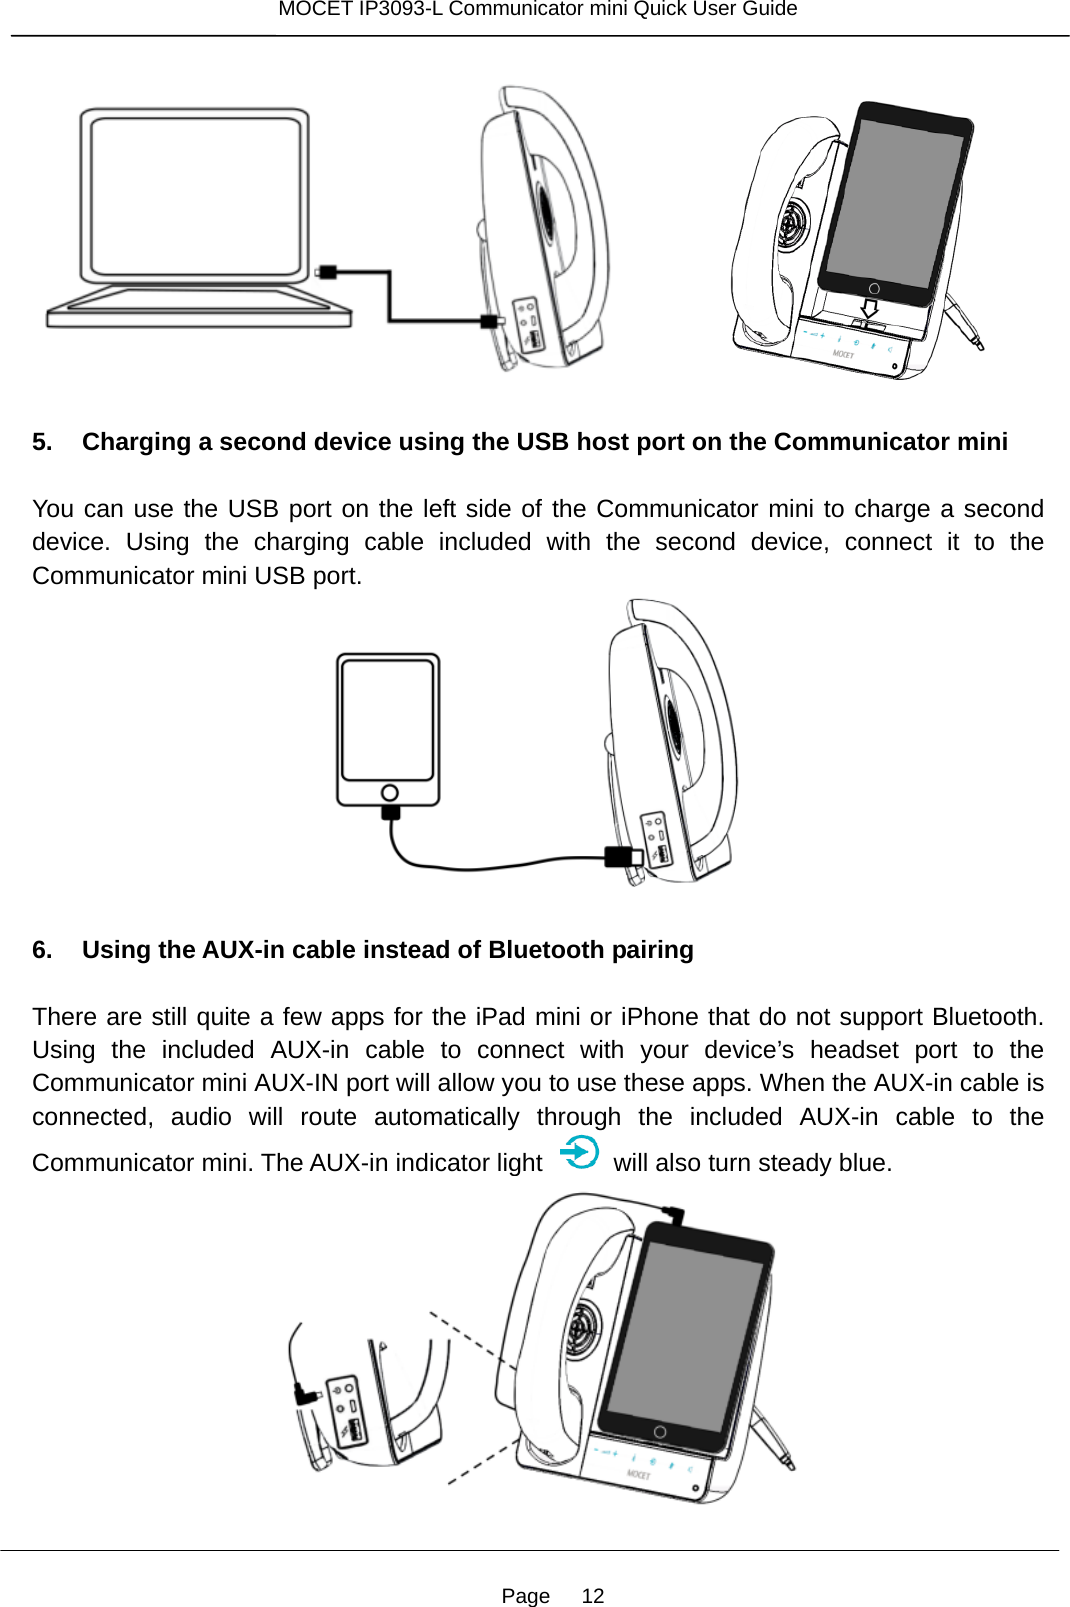 Page   12 MOCET IP3093-L Communicator mini Quick User Guide            5. Charging a second device using the USB host port on the Communicator mini  You can use the USB port on the left side of the Communicator mini to charge a second device. Using the charging cable included with the second device, connect it to the Communicator mini USB port.   6. Using the AUX-in cable instead of Bluetooth pairing  There are still quite a few apps for the iPad mini or iPhone that do not support Bluetooth. Using the included AUX-in cable to connect with your device’s headset port to the Communicator mini AUX-IN port will allow you to use these apps. When the AUX-in cable is connected, audio will route automatically through the included AUX-in cable to the Communicator mini. The AUX-in indicator light    will also turn steady blue.  